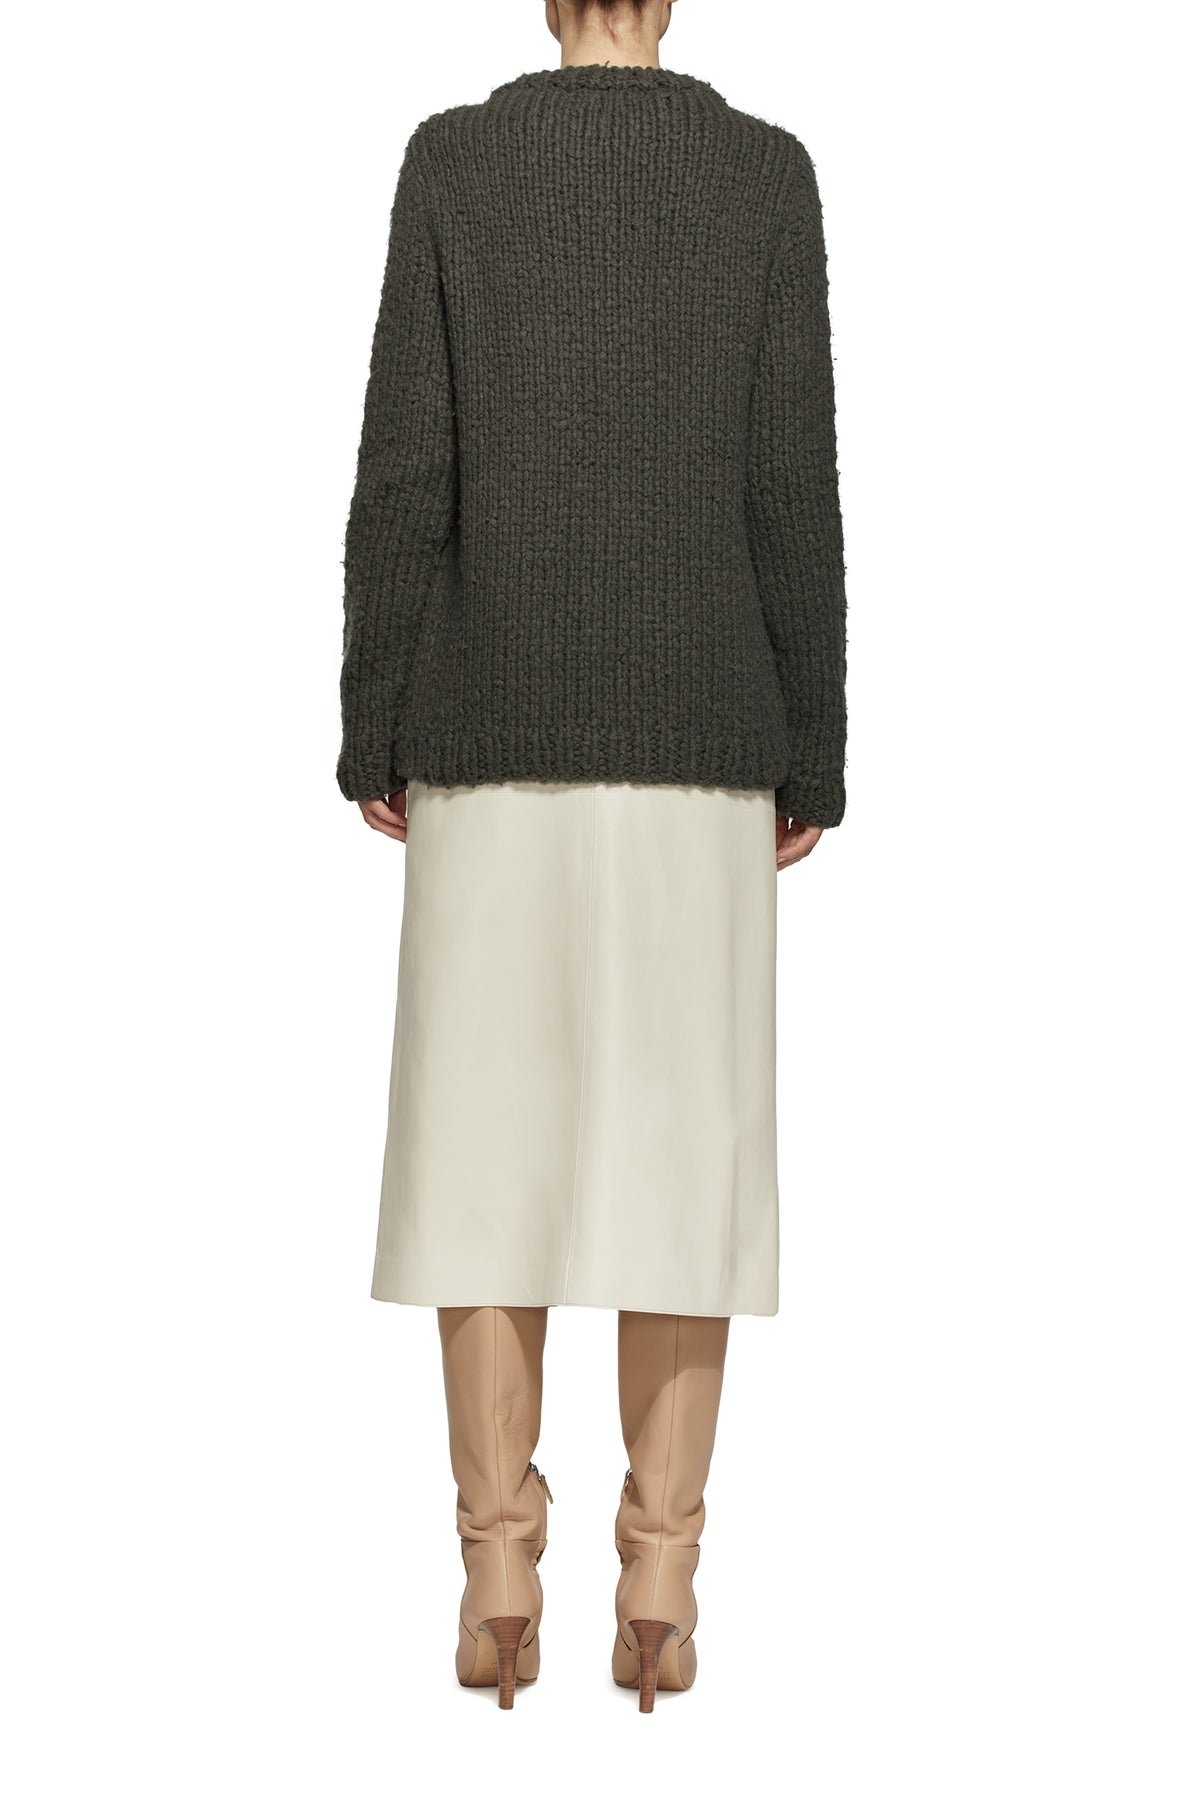 Lawrence Knit Sweater in Olive Welfat Cashmere